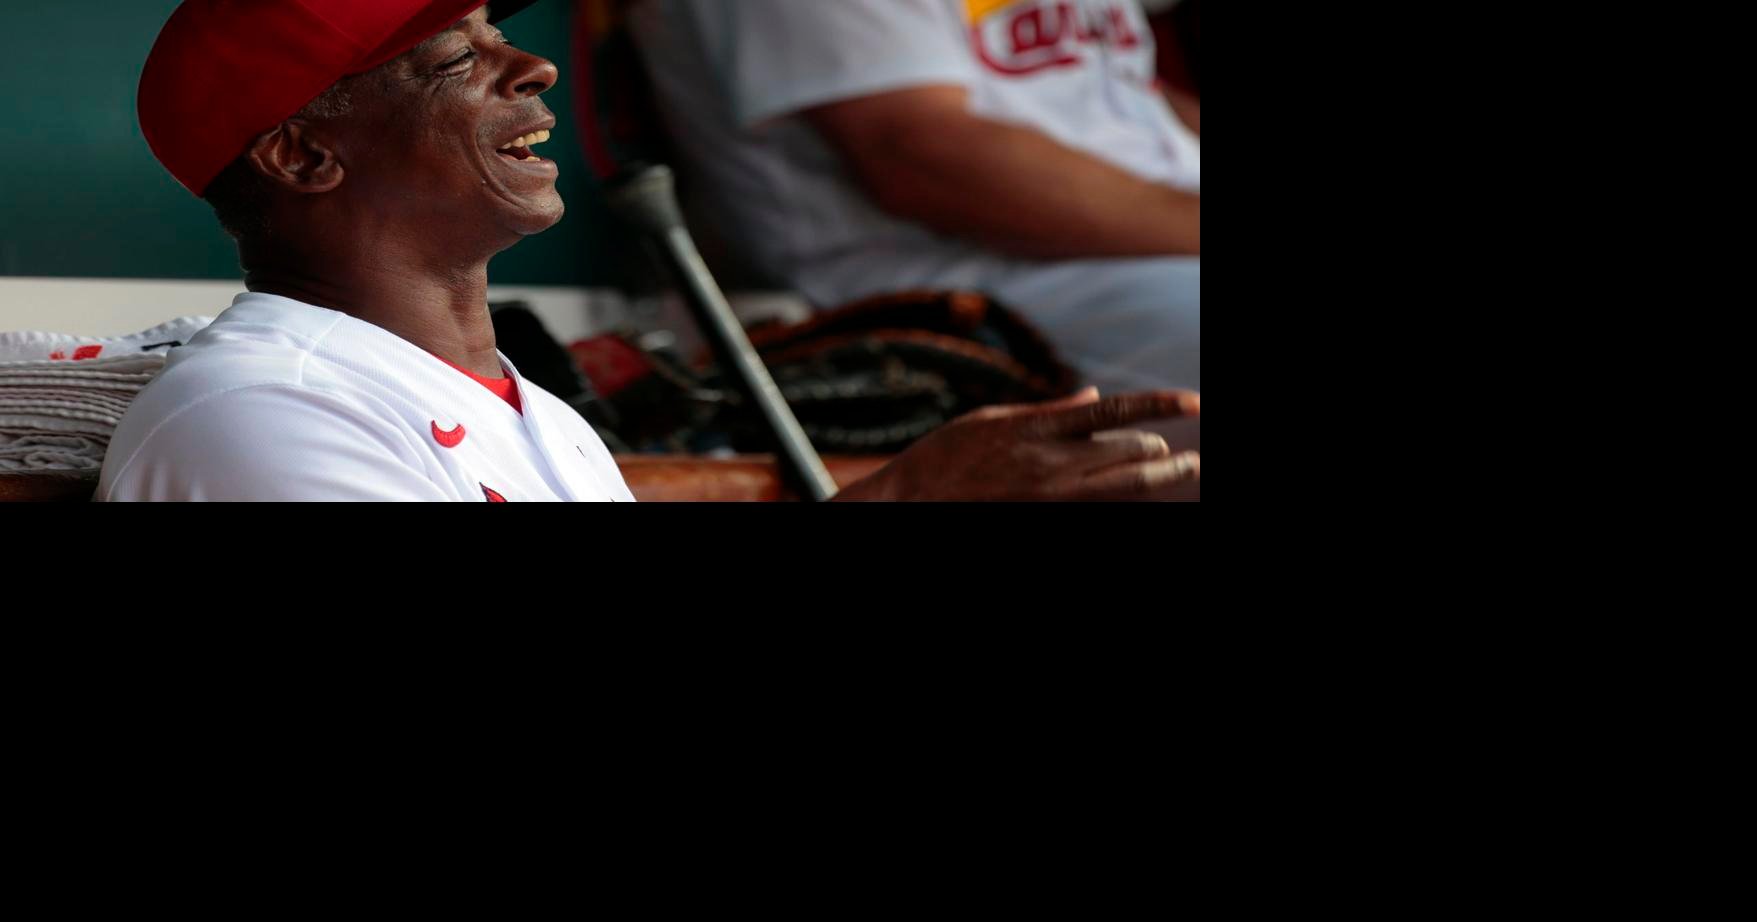 Cardinals' coach Willie McGee spending time at home training as a boxer